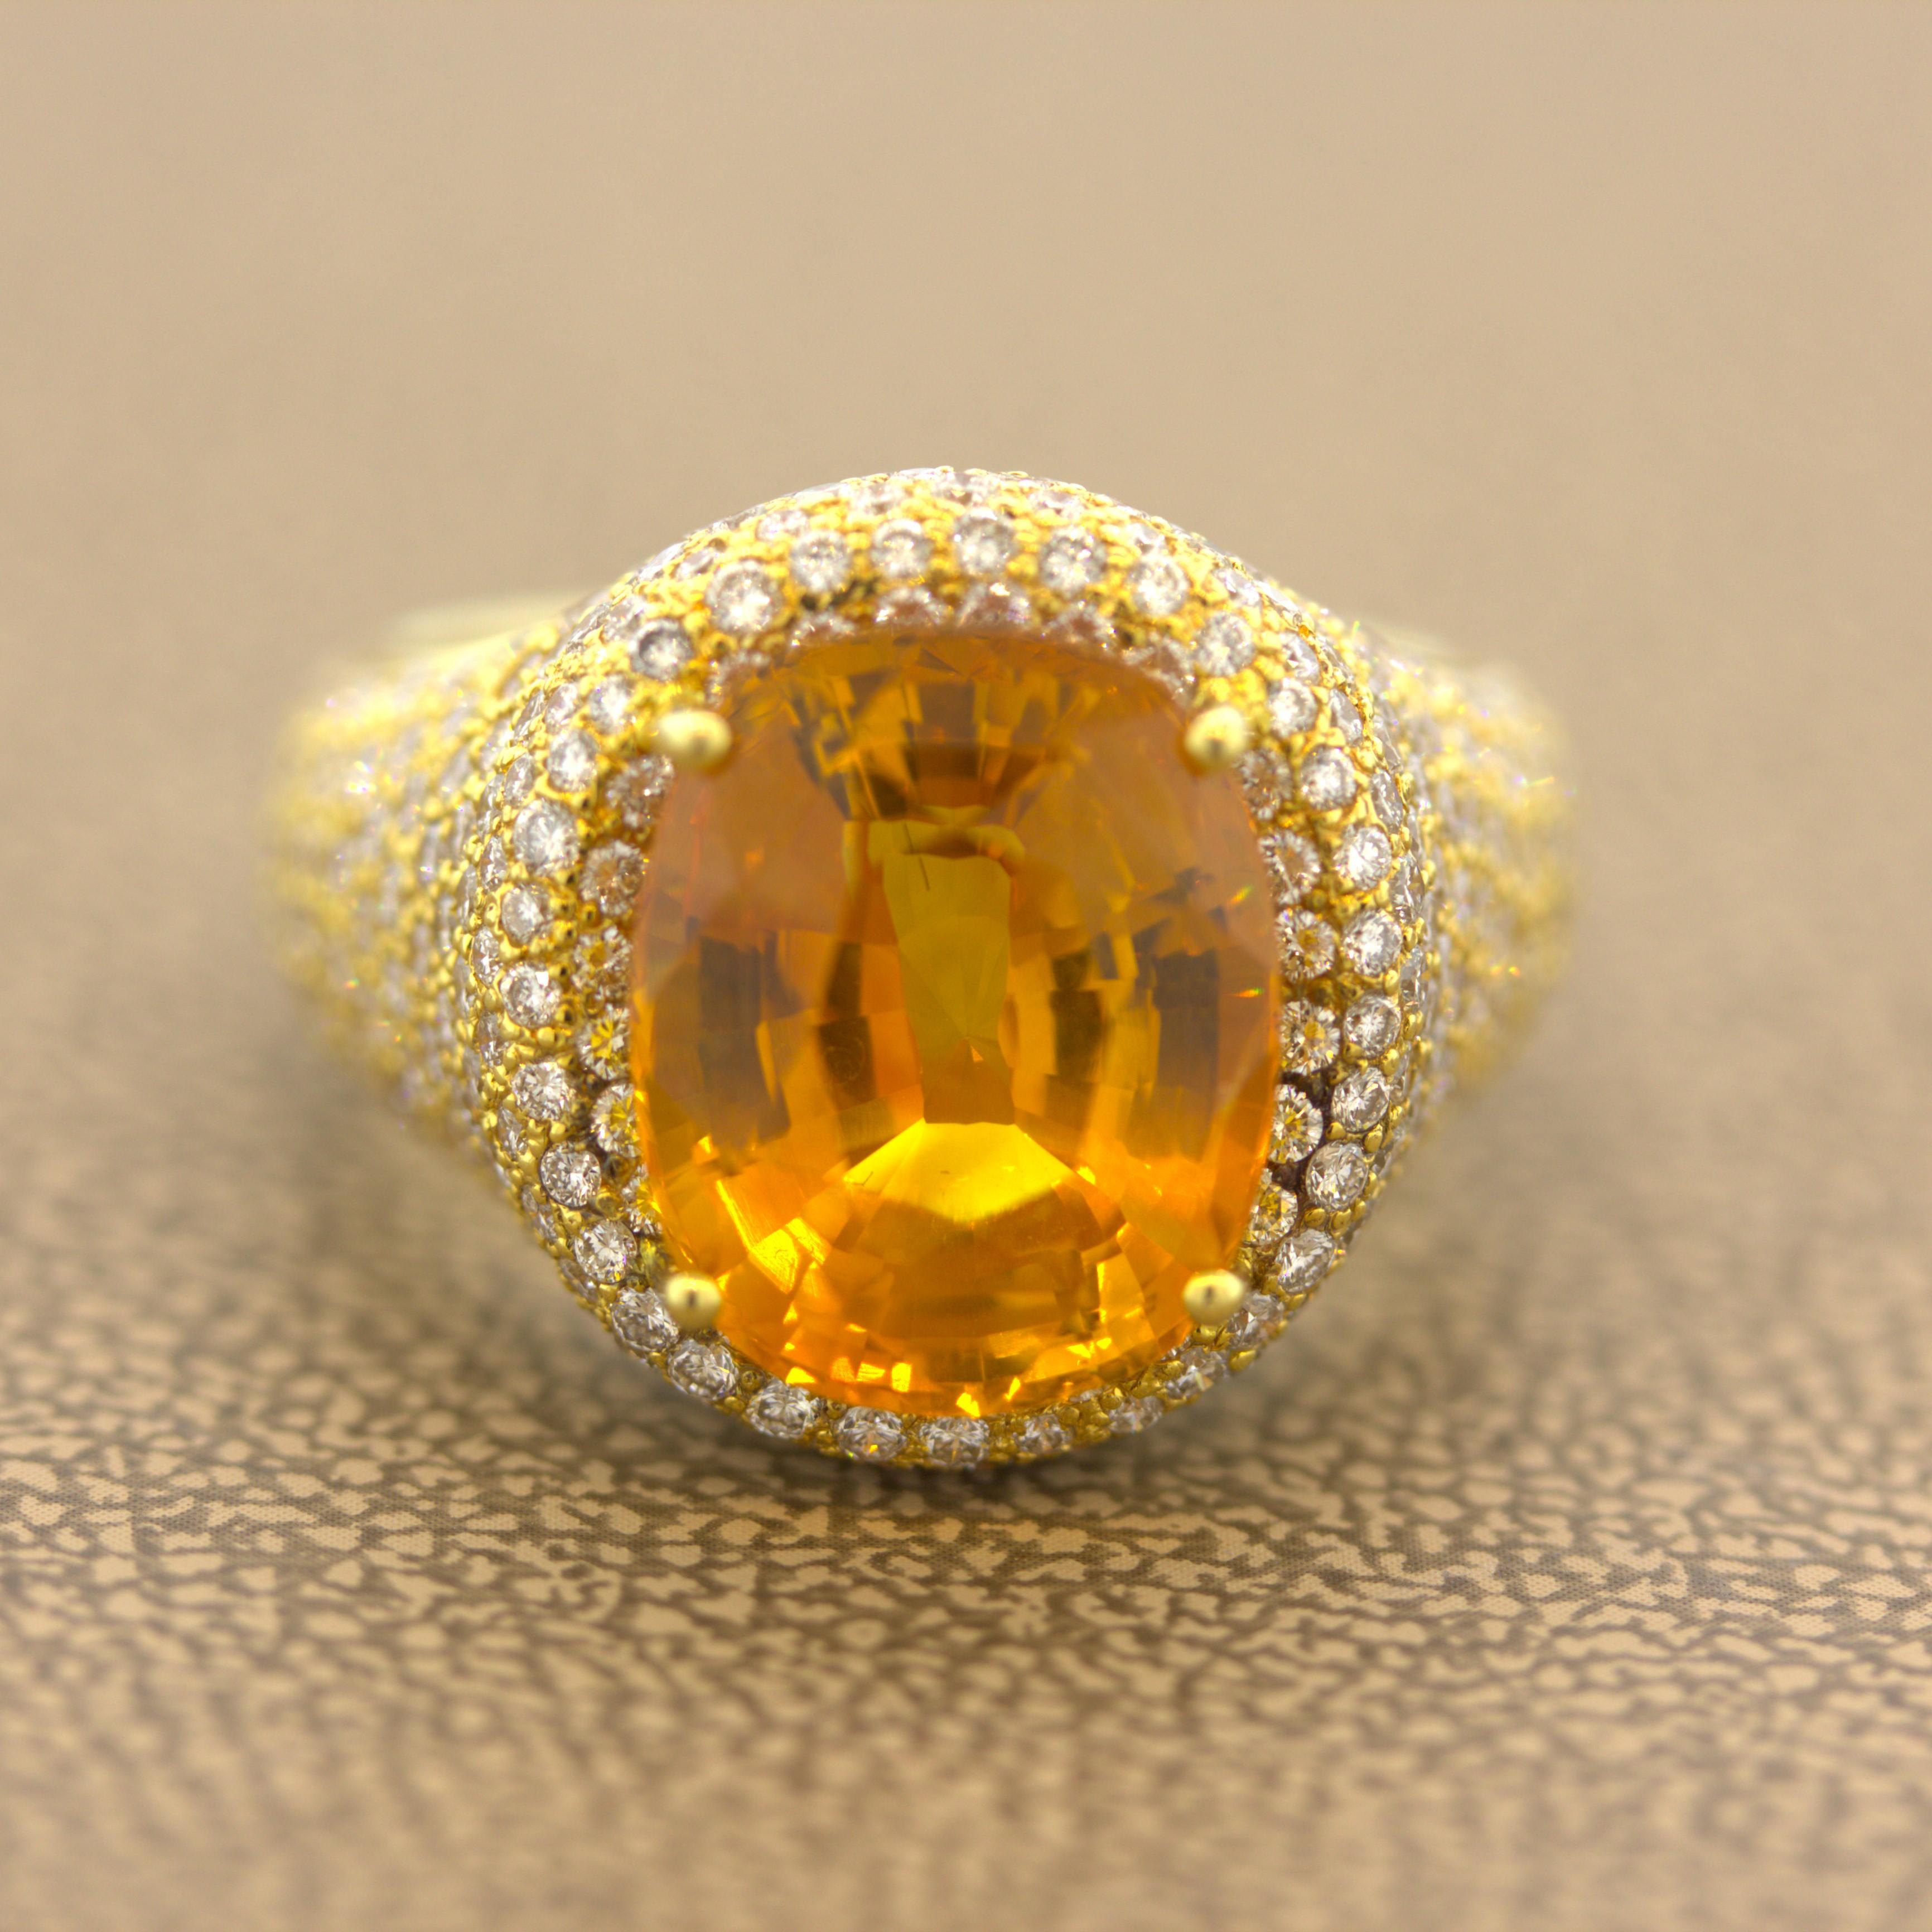 A lovely gem quality orange sapphire takes center stage! It weighs an impressive 8.40 carats and has a vibrant brilliant orange color with no visible inclusions. It is complemented by 4.22 carats of round brilliant pave-set diamonds set around the